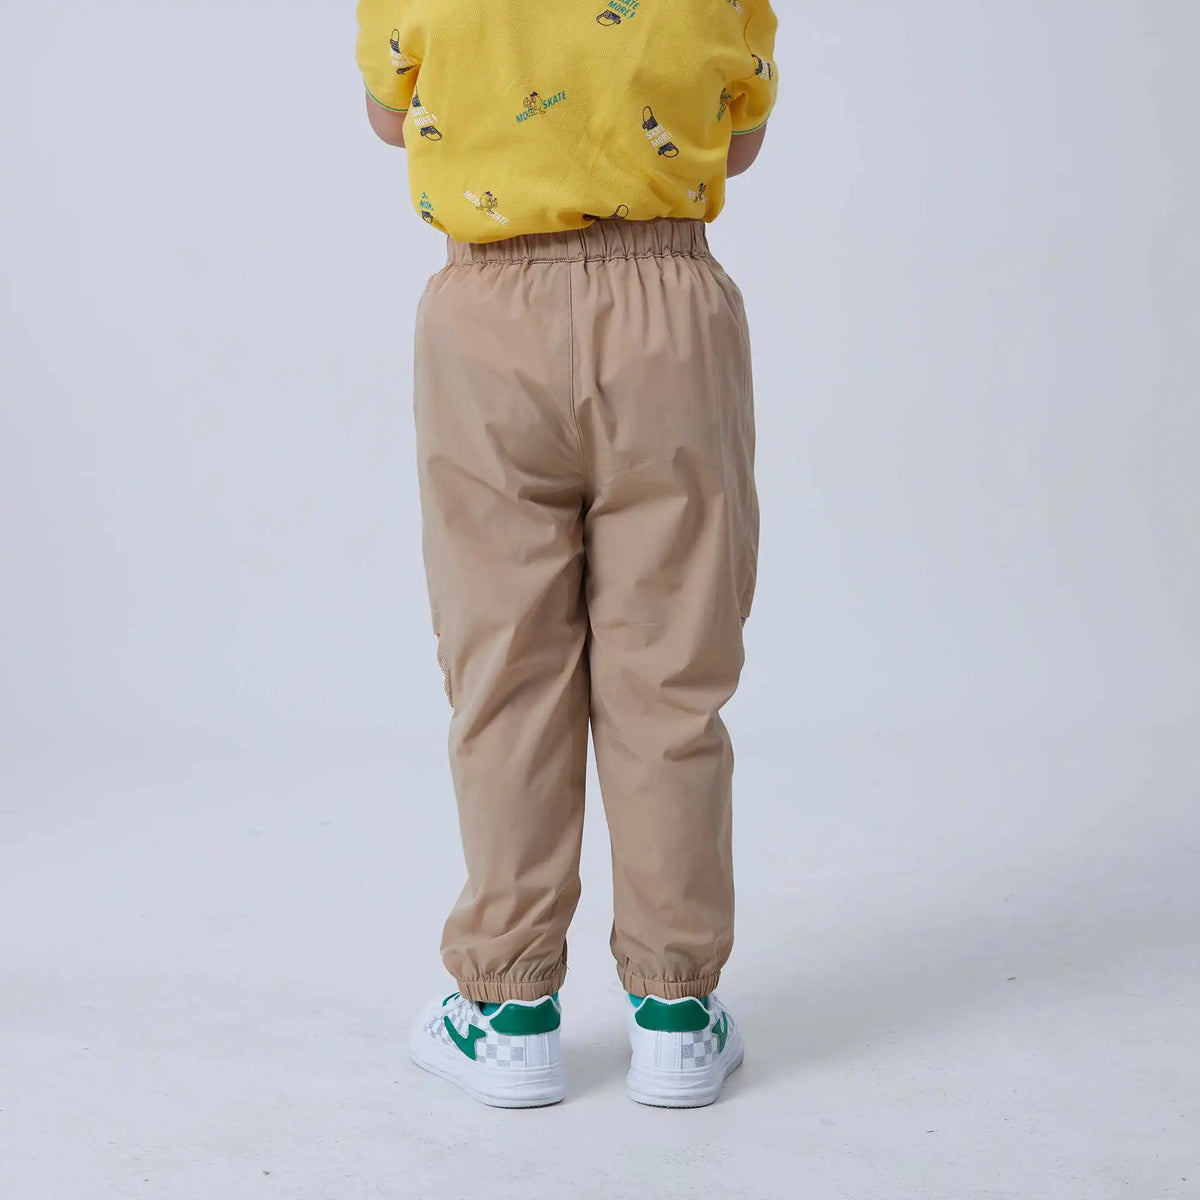 Ankle-Tied Fashion Pants For Boys